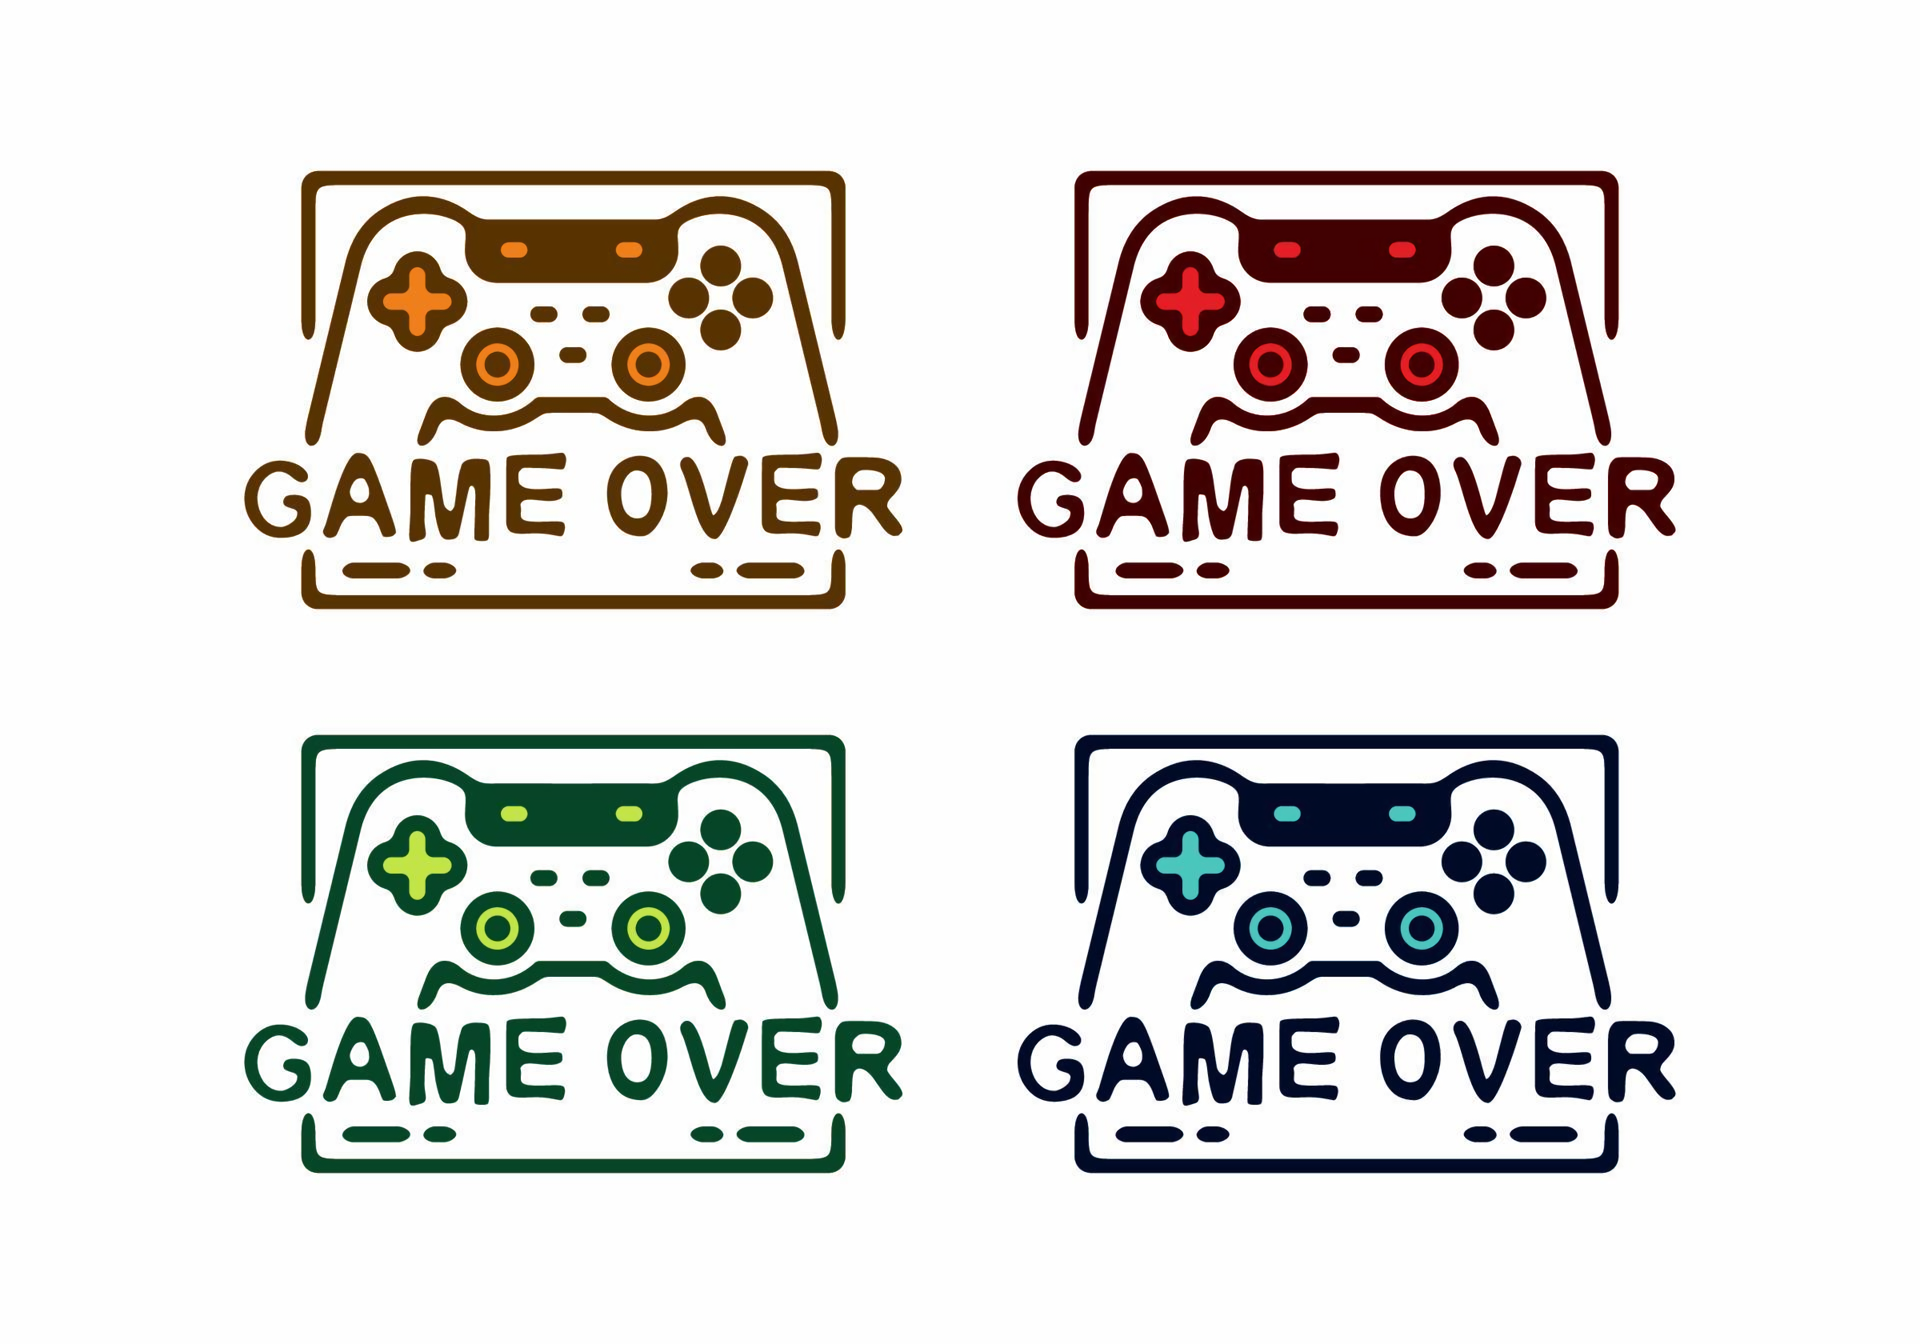 Game Over HD Wallpapers And Backgrounds